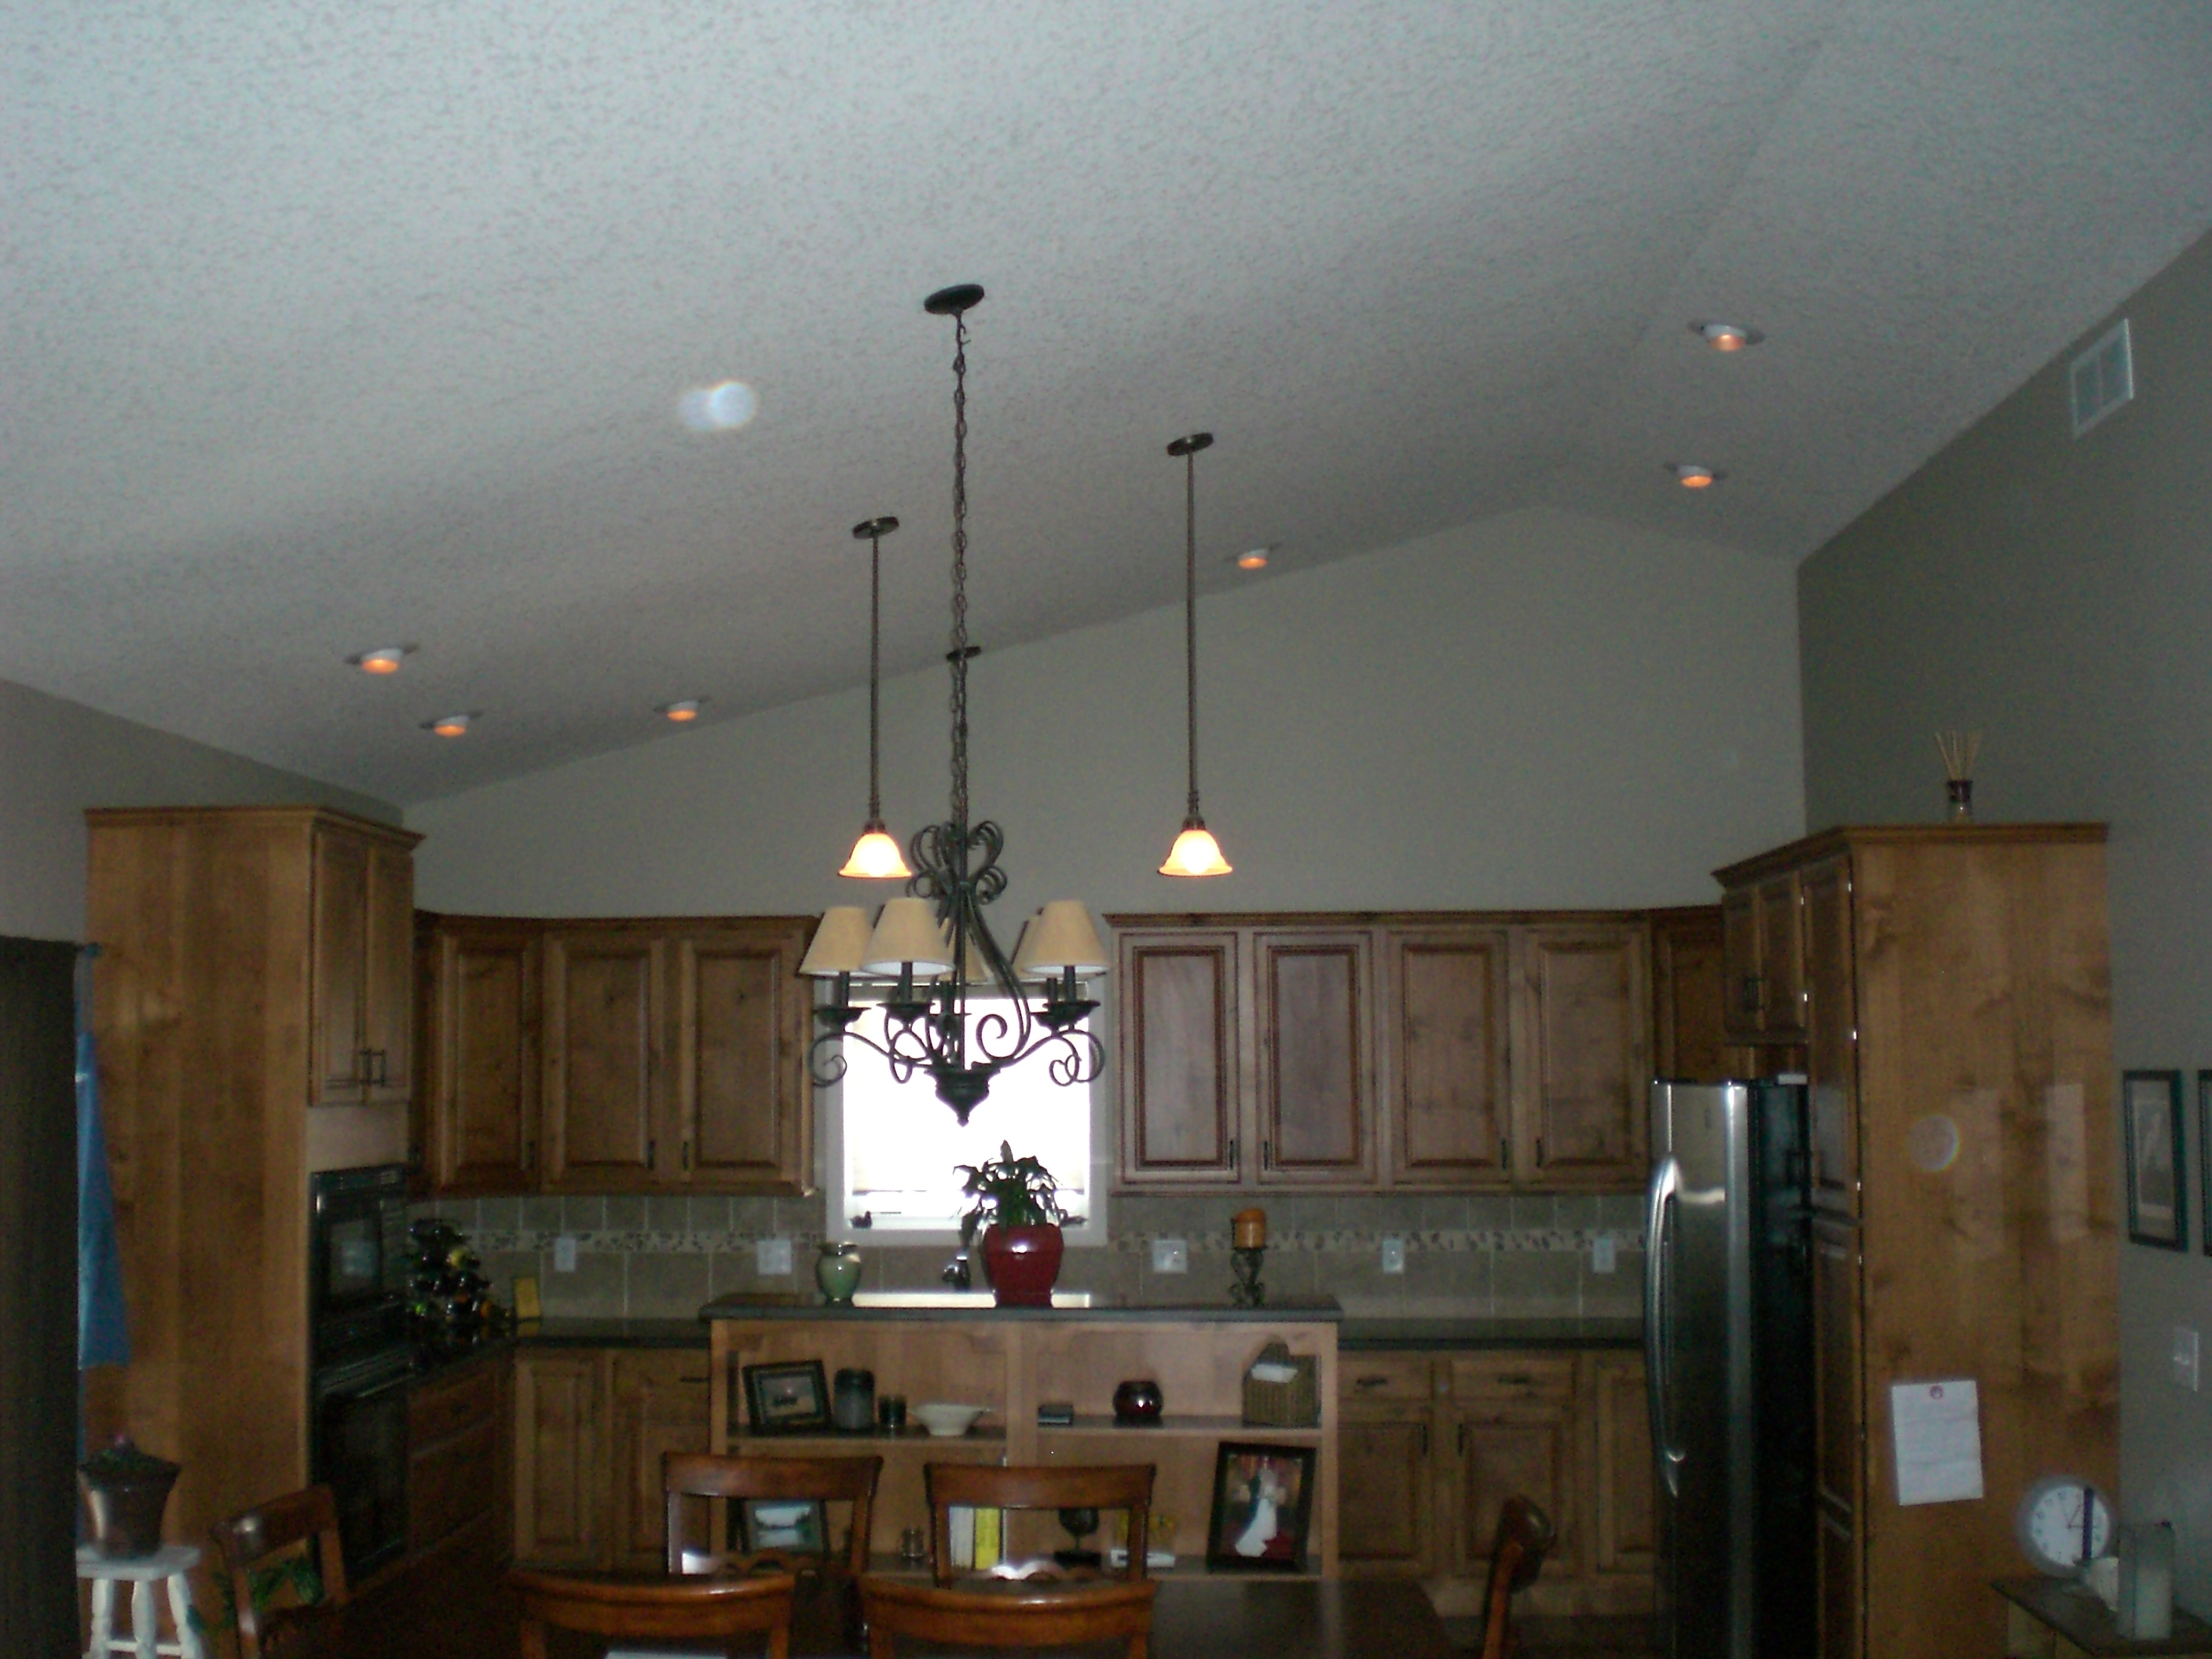 Recessed Lighting For Vaulted Ceilingsrecessed lighting sloped ceiling